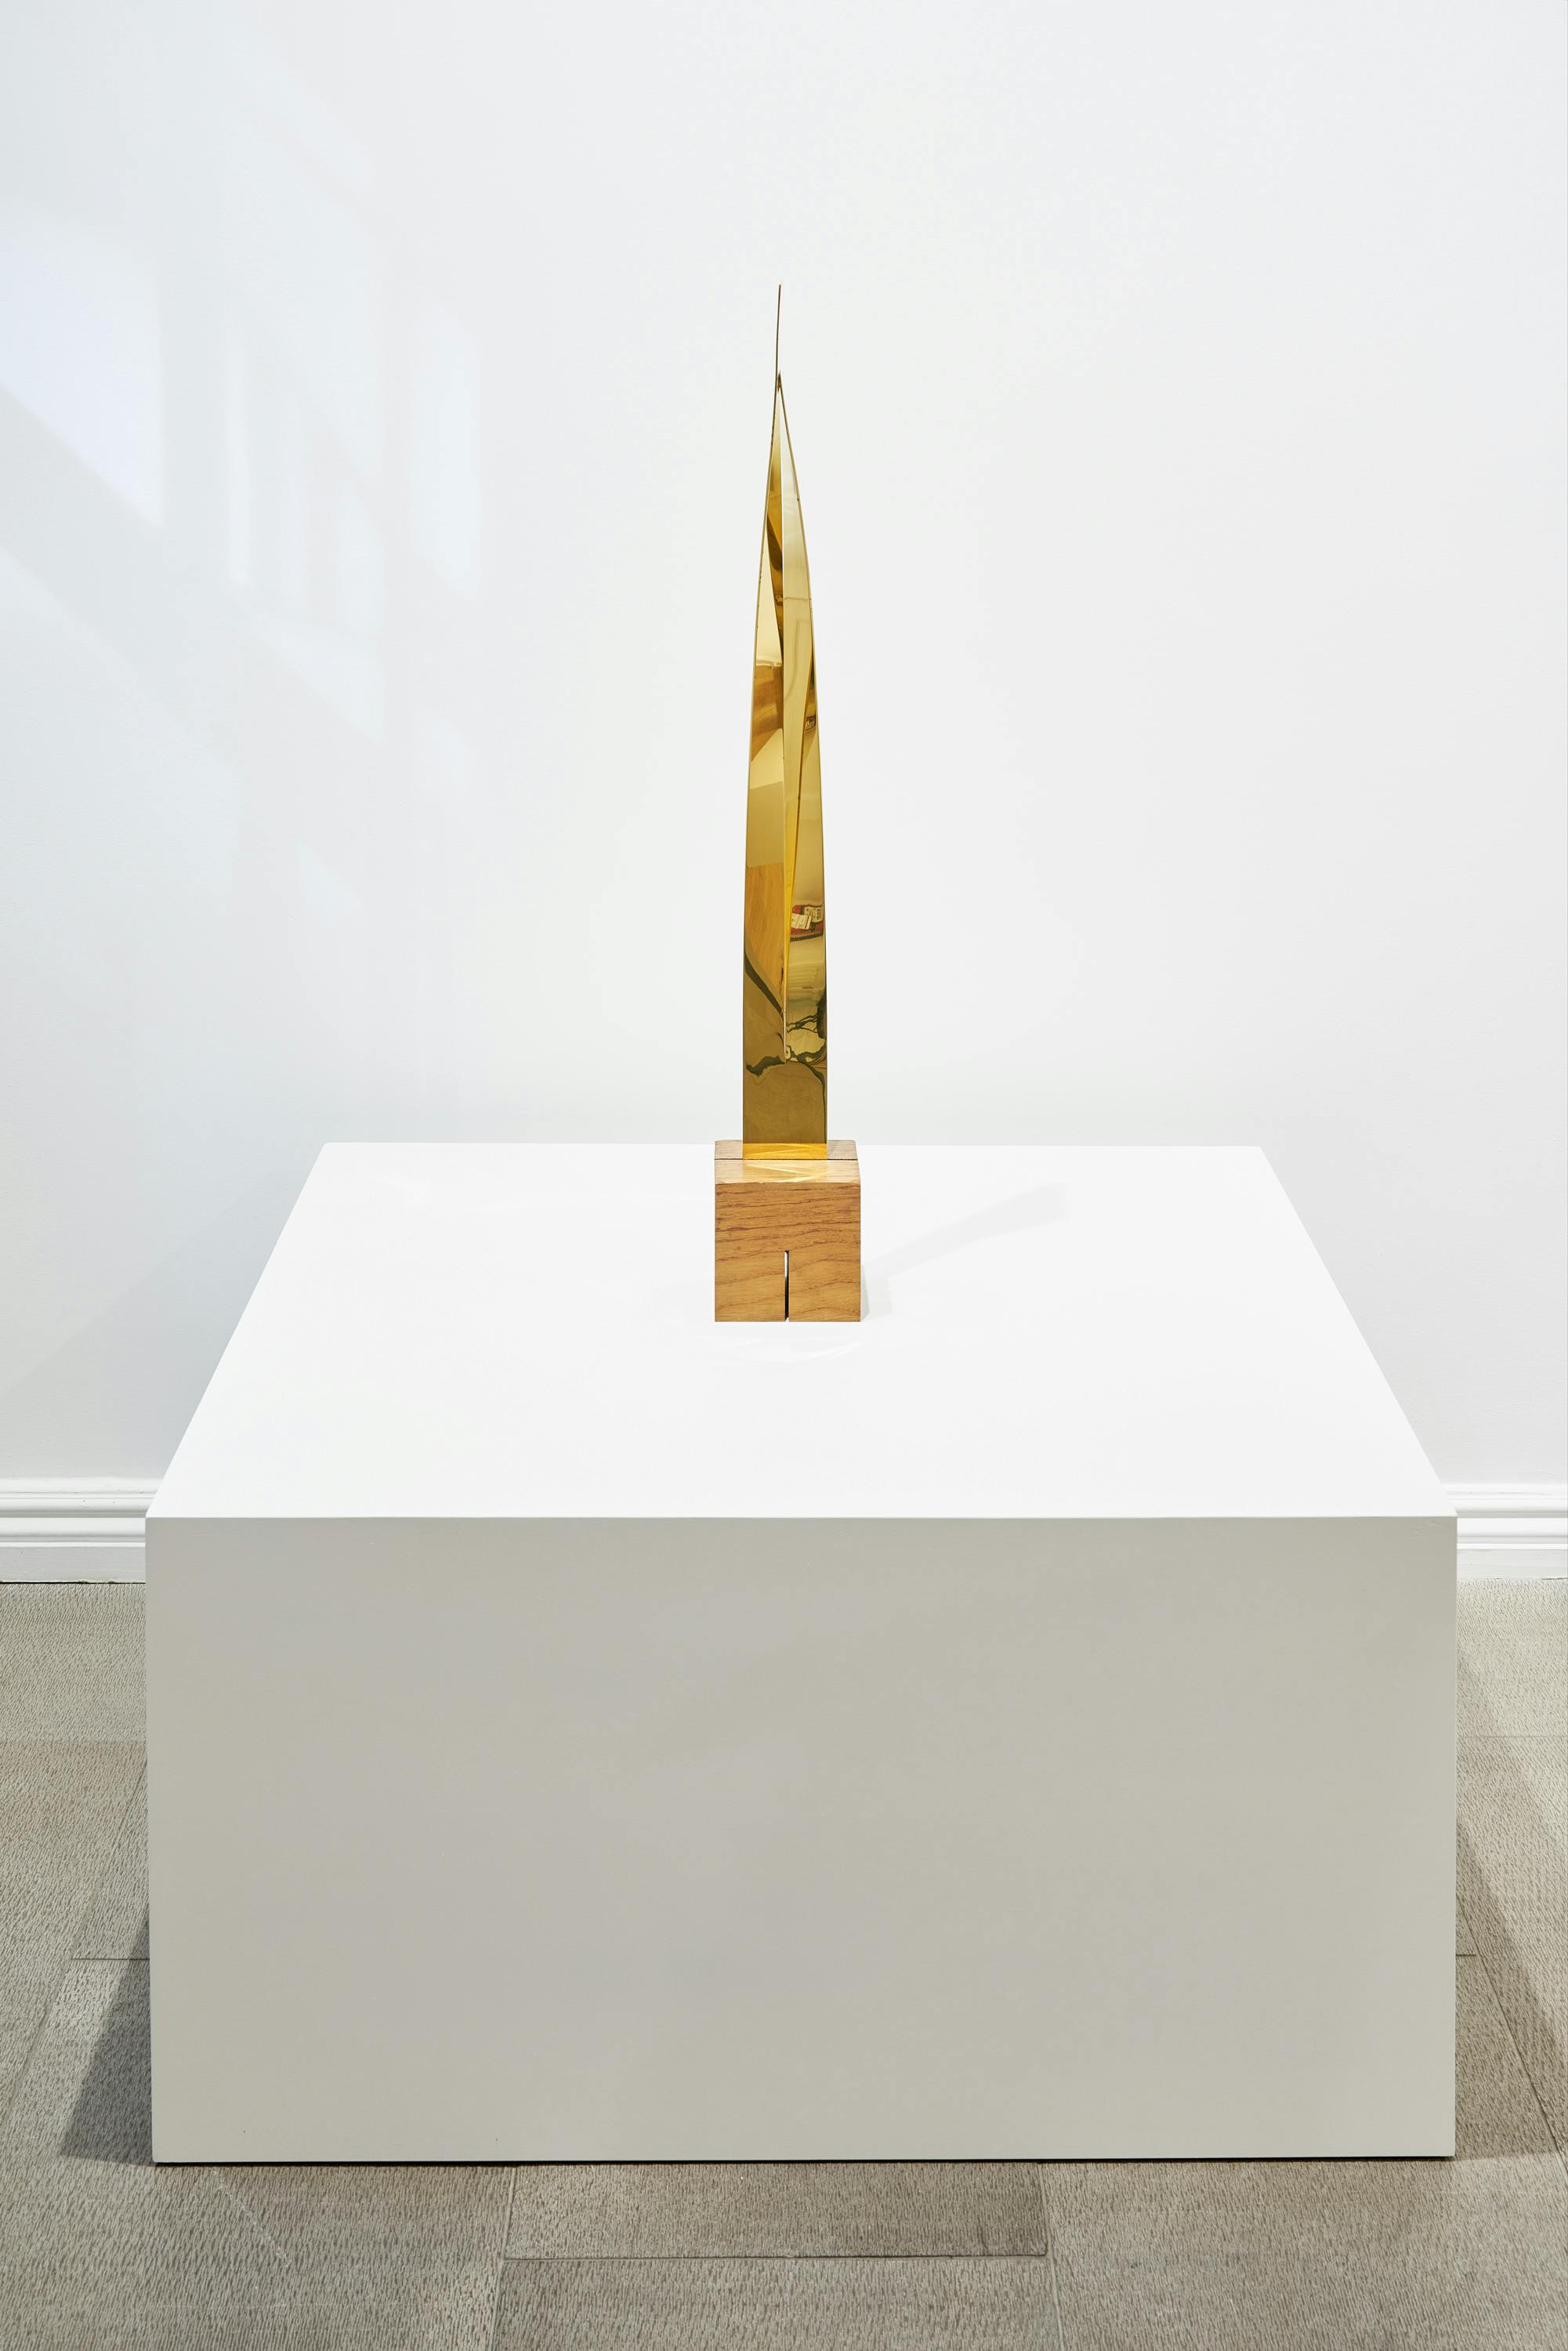 Gallery view of From Surface to Space exhibition depicting one gold-colored, abstract sculpture.